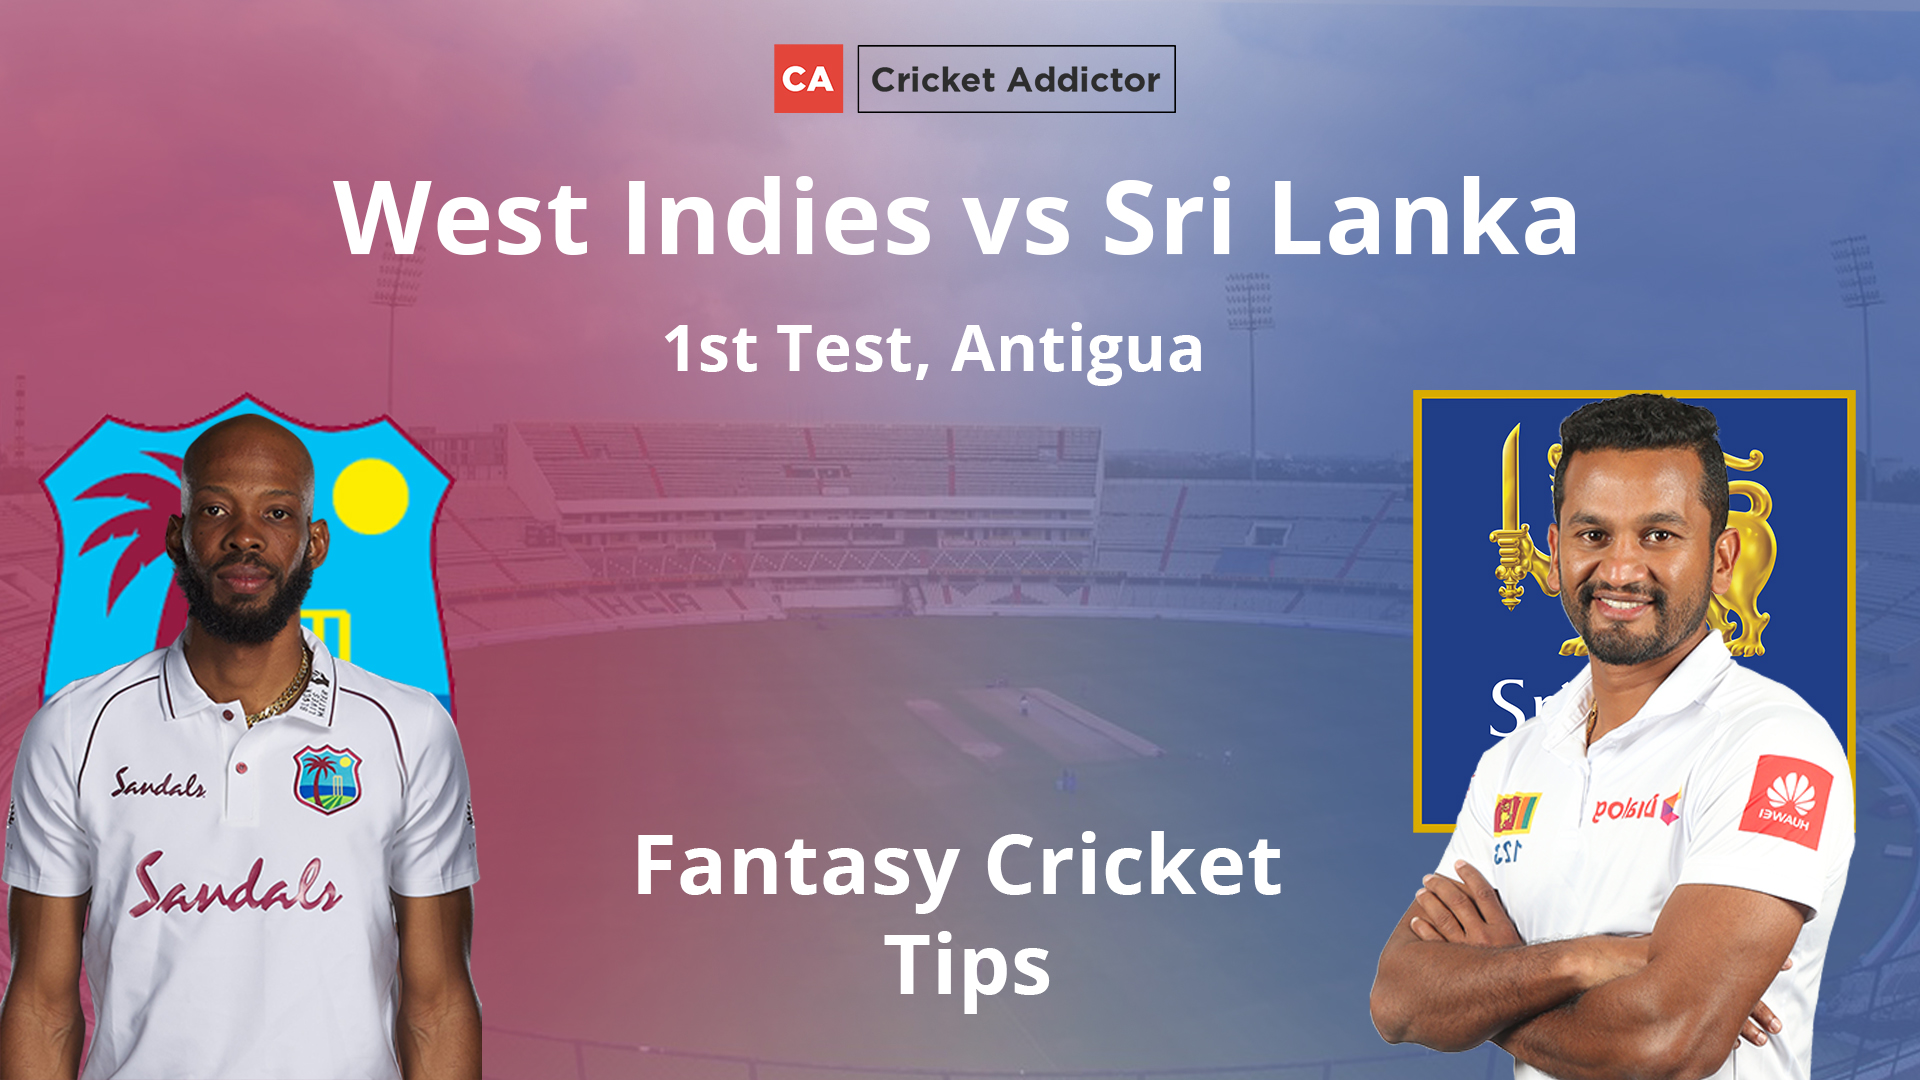 West Indies vs Sri Lanka 1st Test Dream11 Prediction, Fantasy Cricket Tips, Playing XI, Pitch Report, Dream11 Team, Injury Update.